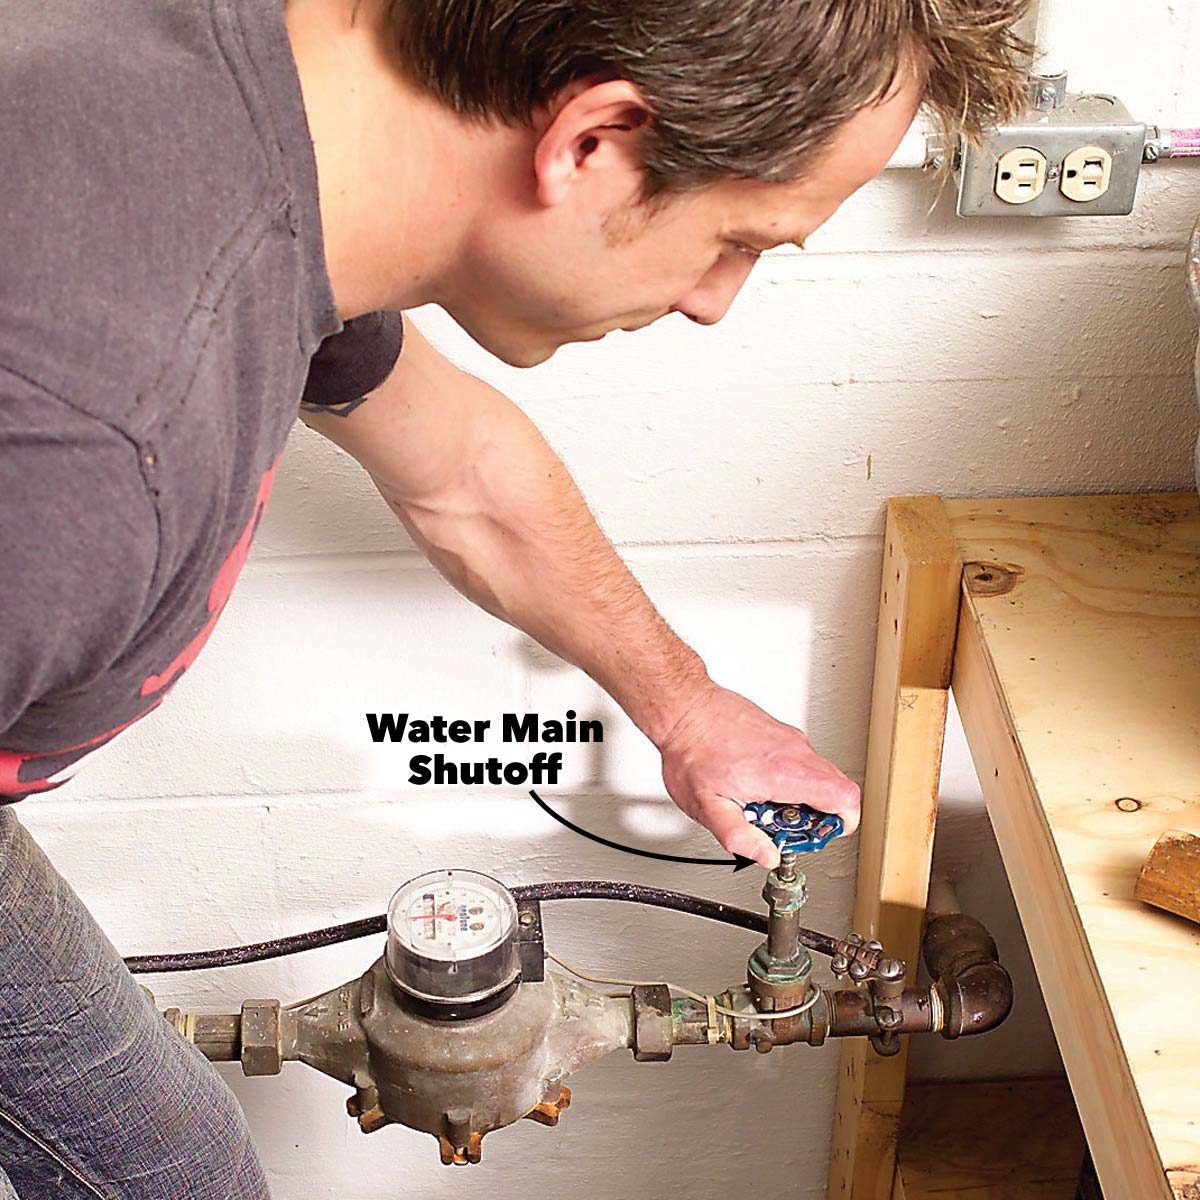 How to Turn Off Water To House and Prevent Damage (Guide) - How To Turn Off The Water In Your House